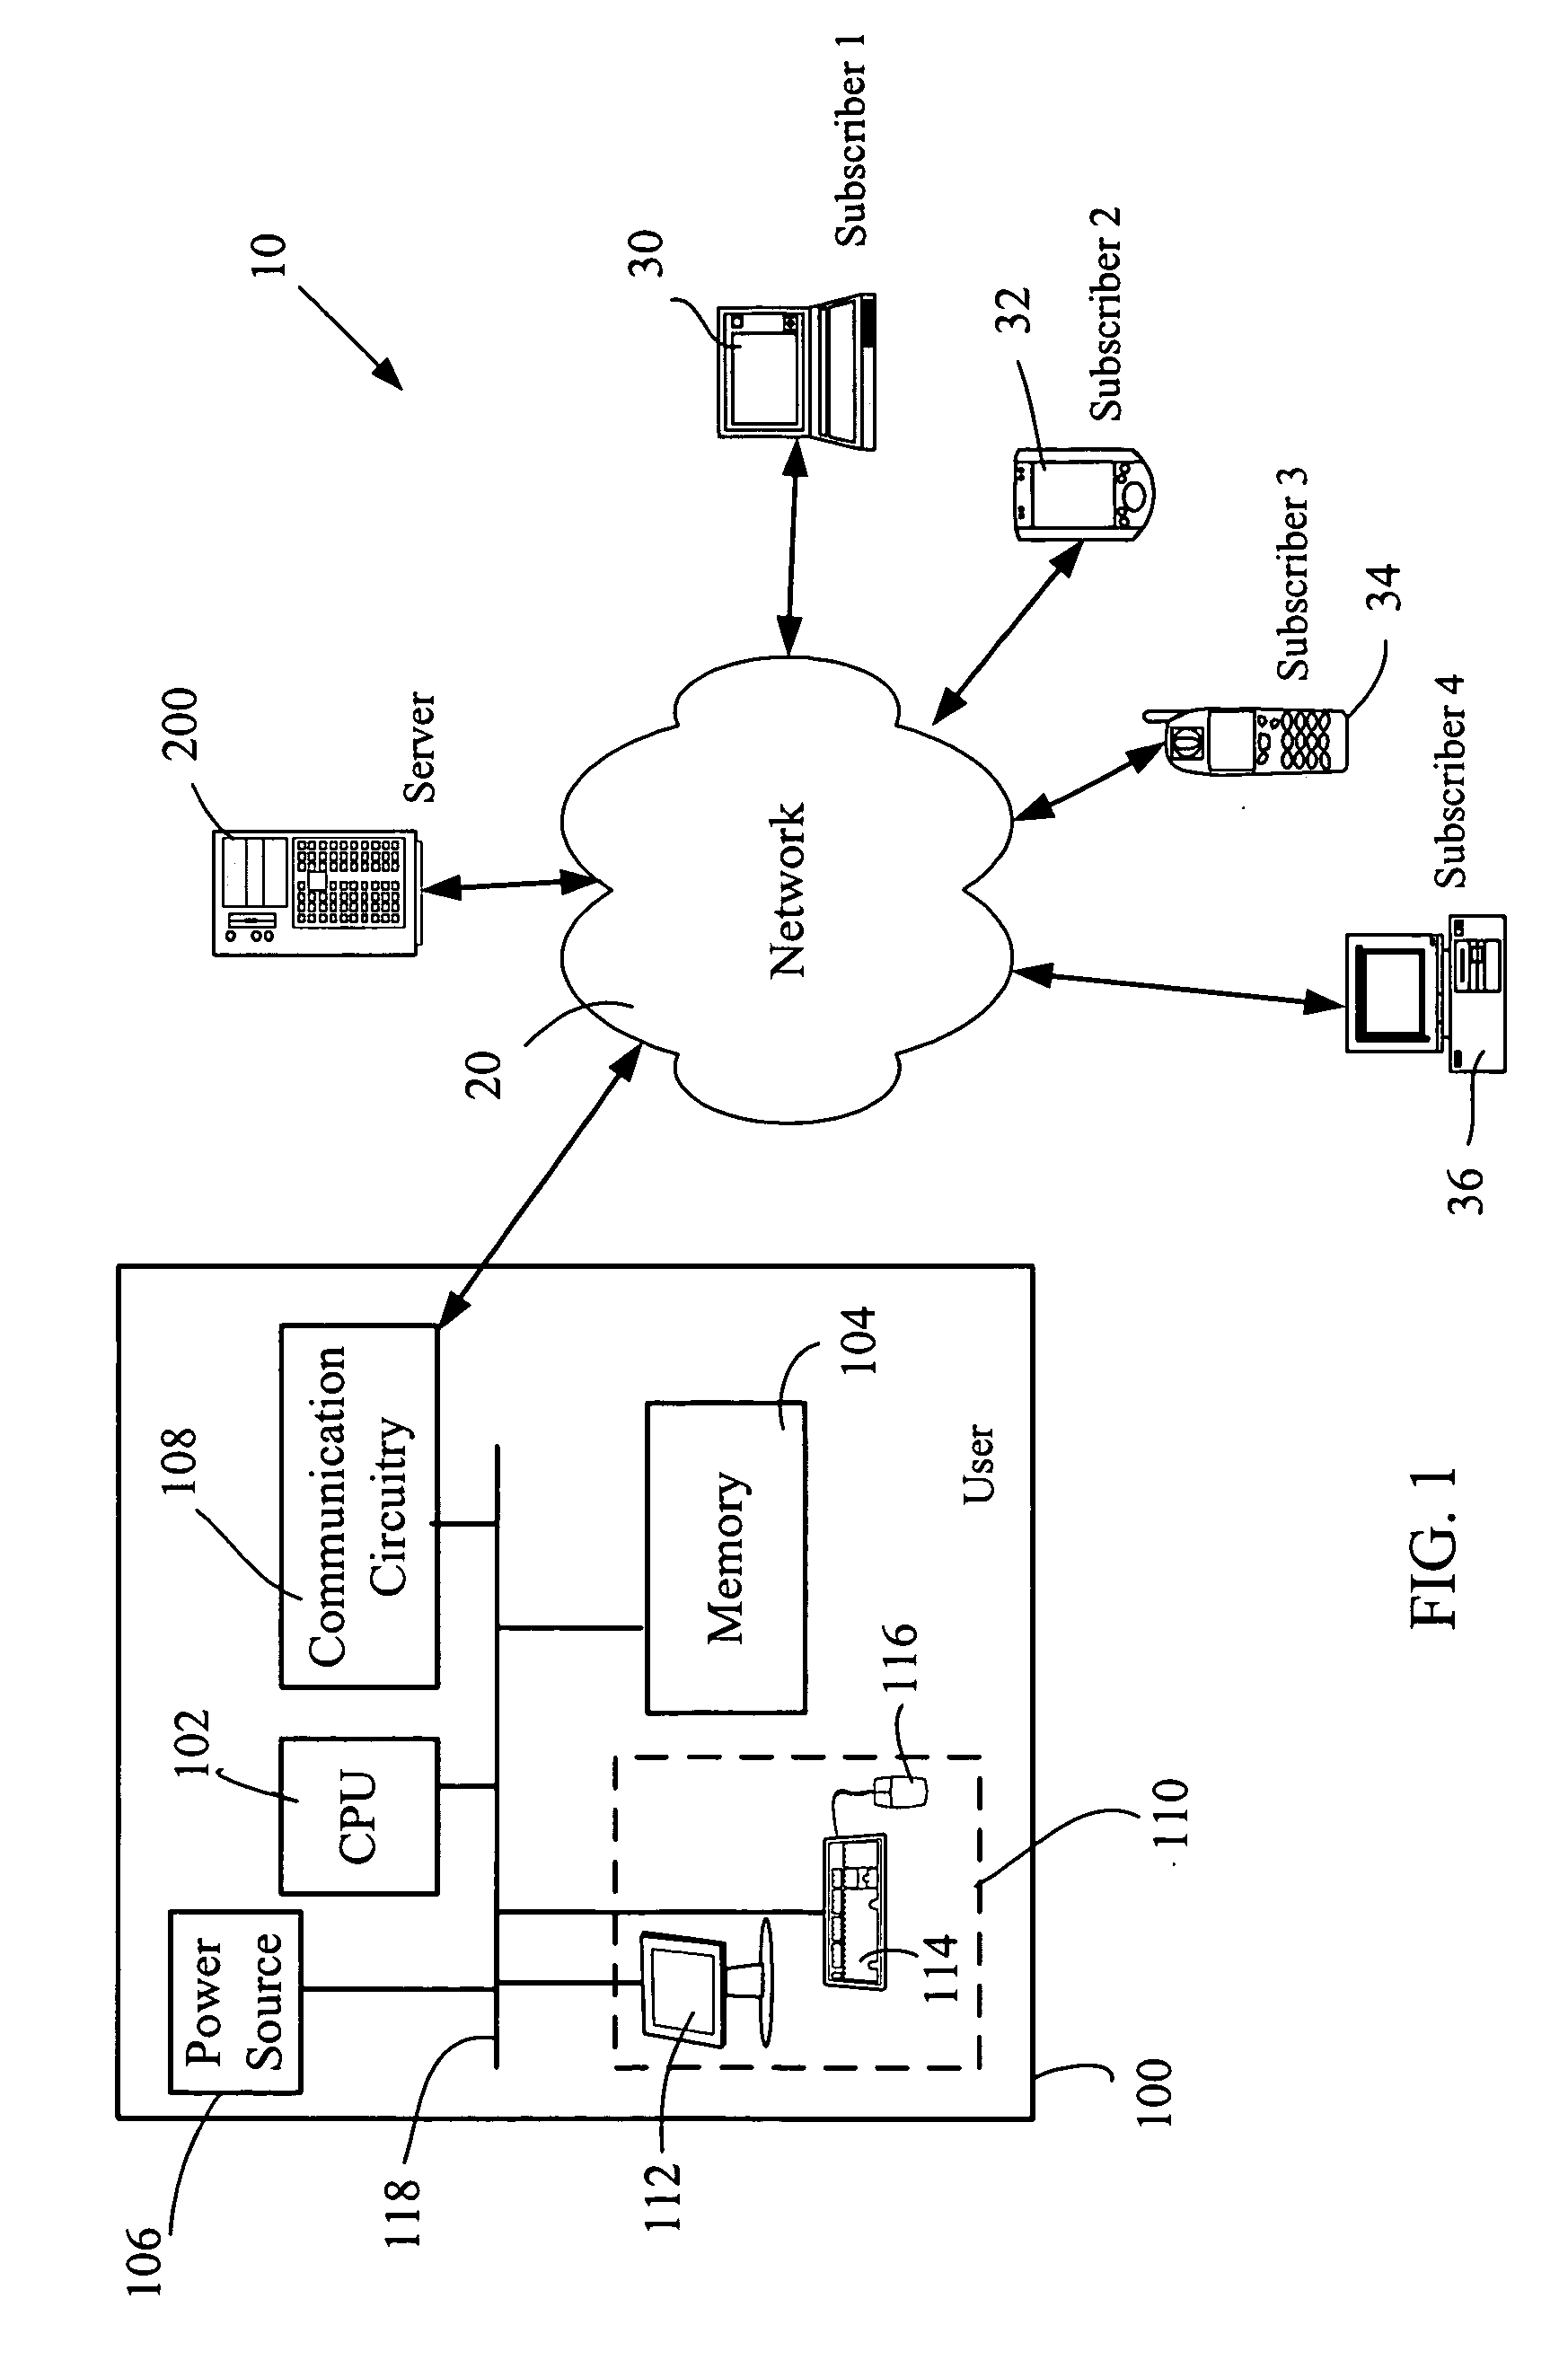 Universal presence indicator and instant messaging system